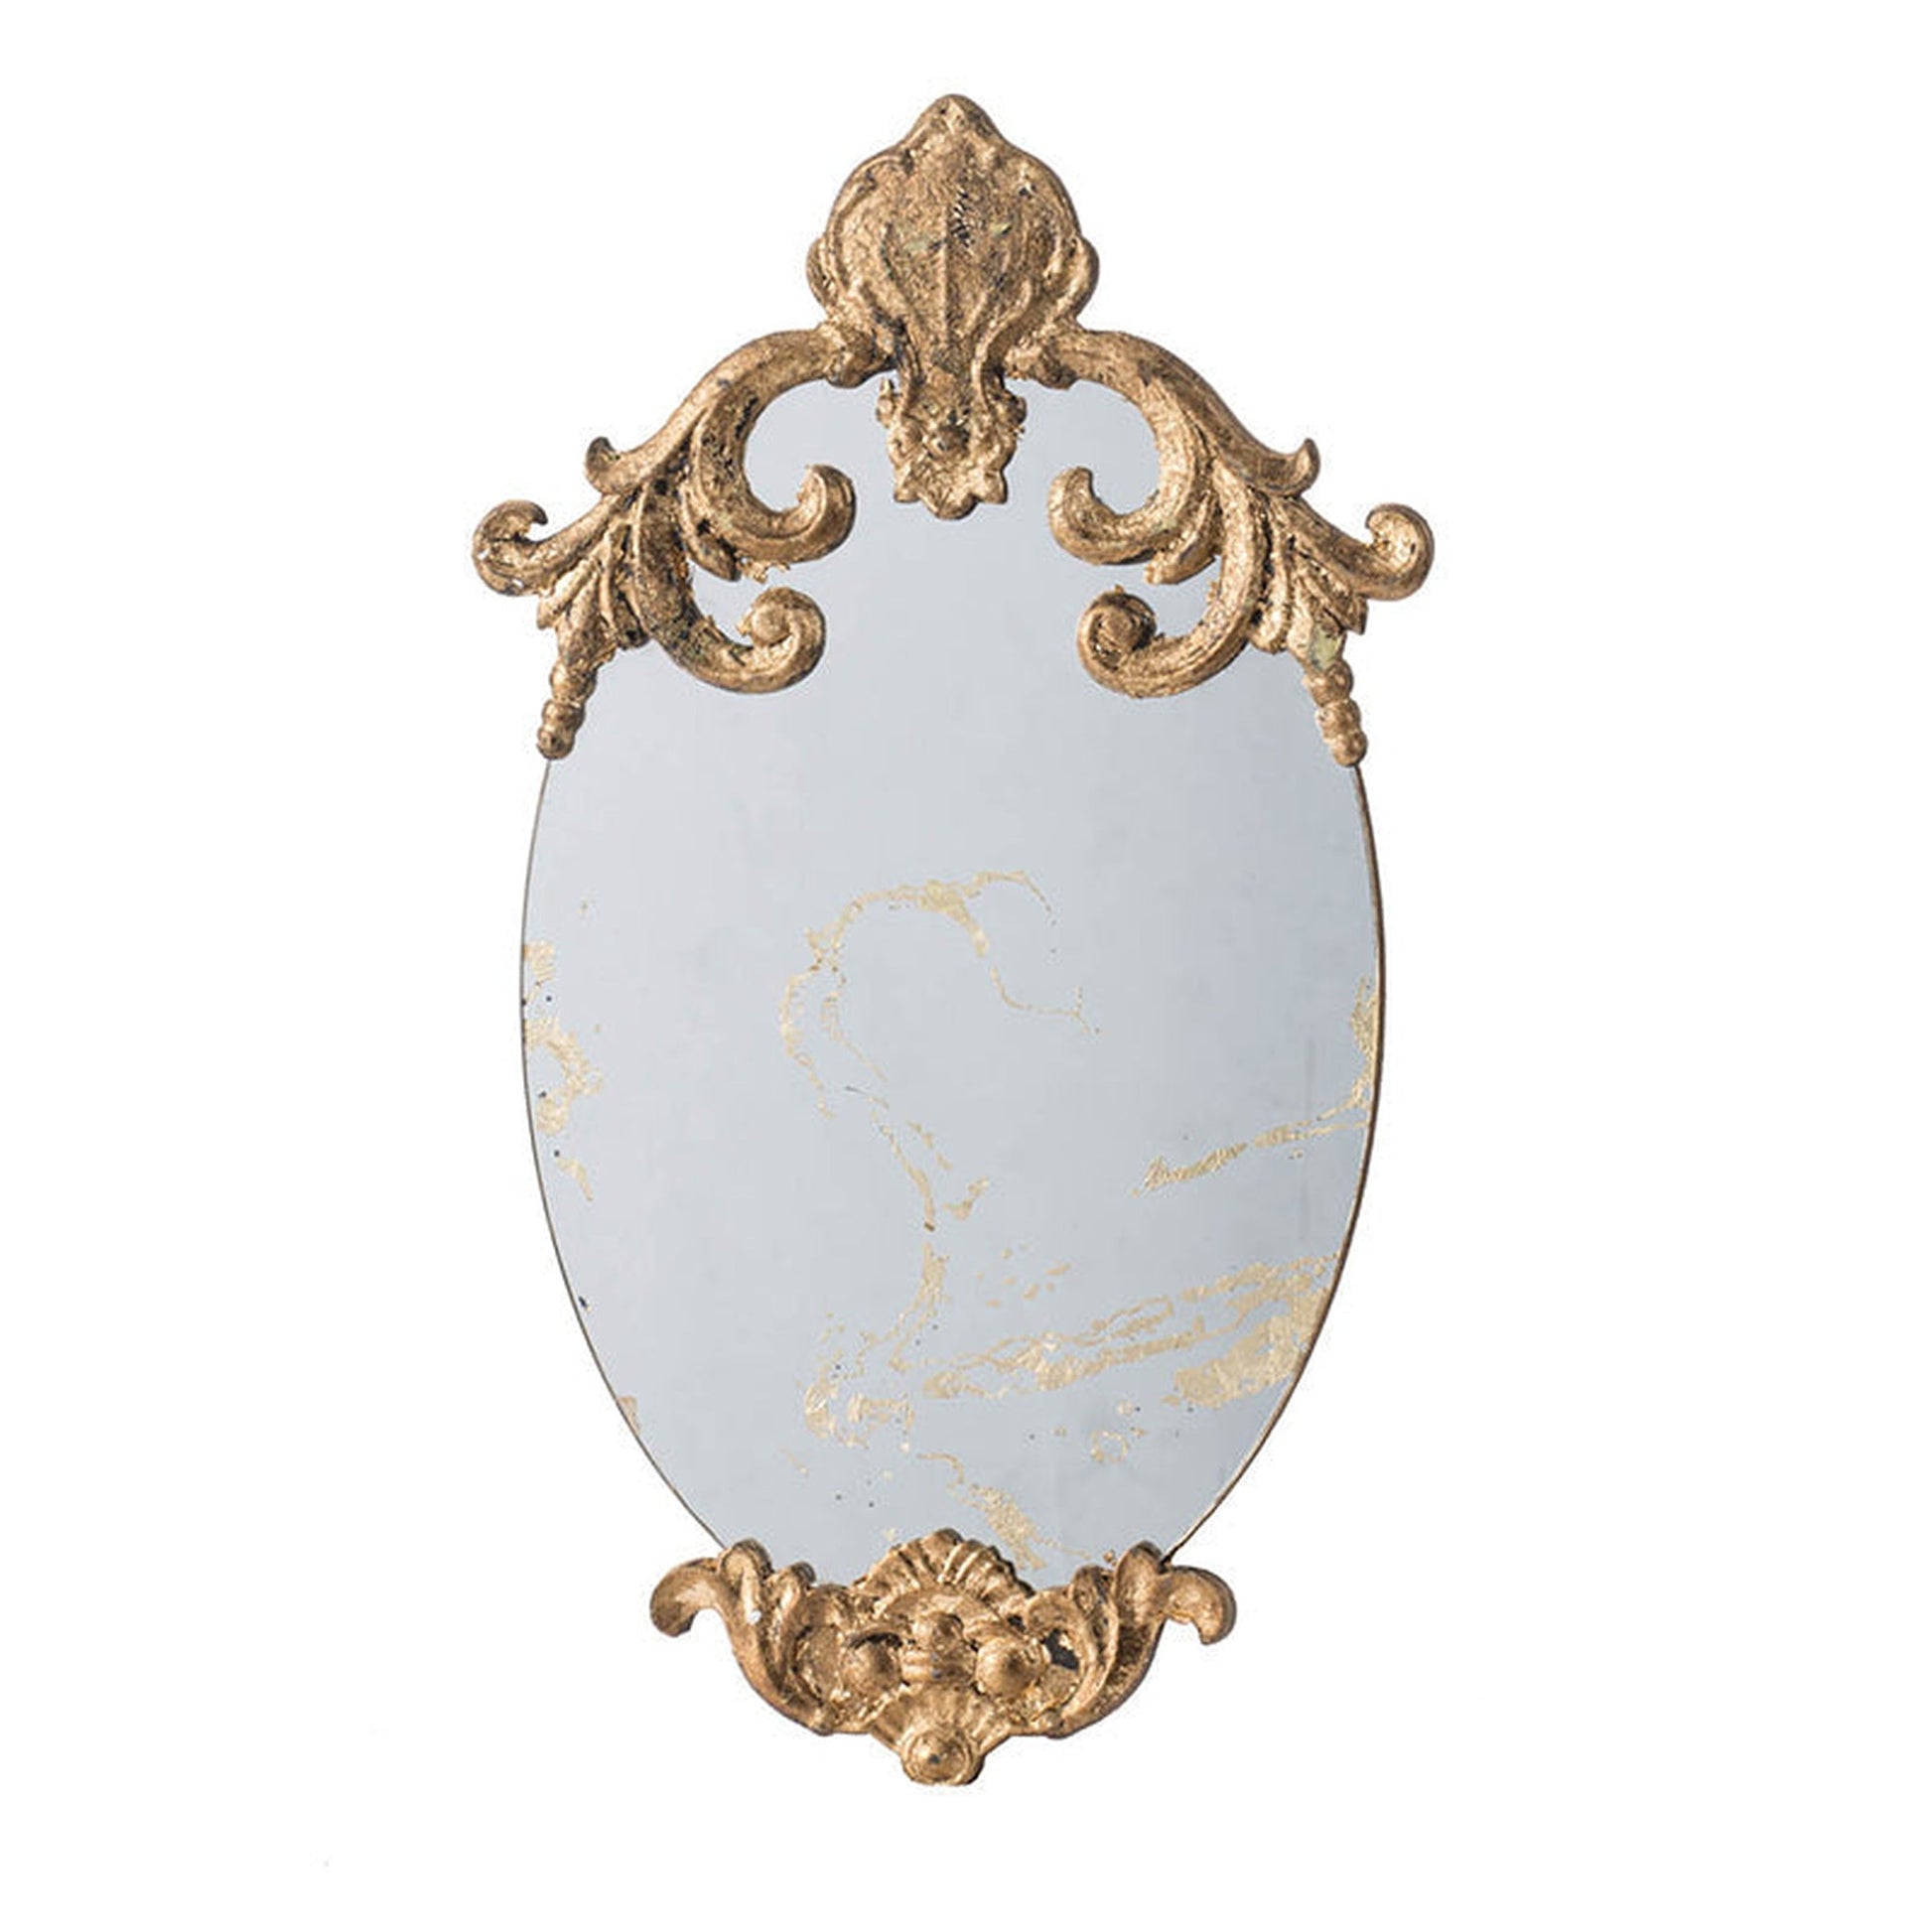 A&B Home 12" x 21" Bundle of 33 Decorative Oval Shape Antique Gold Resin Frame Wall-Mounted Mirror With Ornate Design